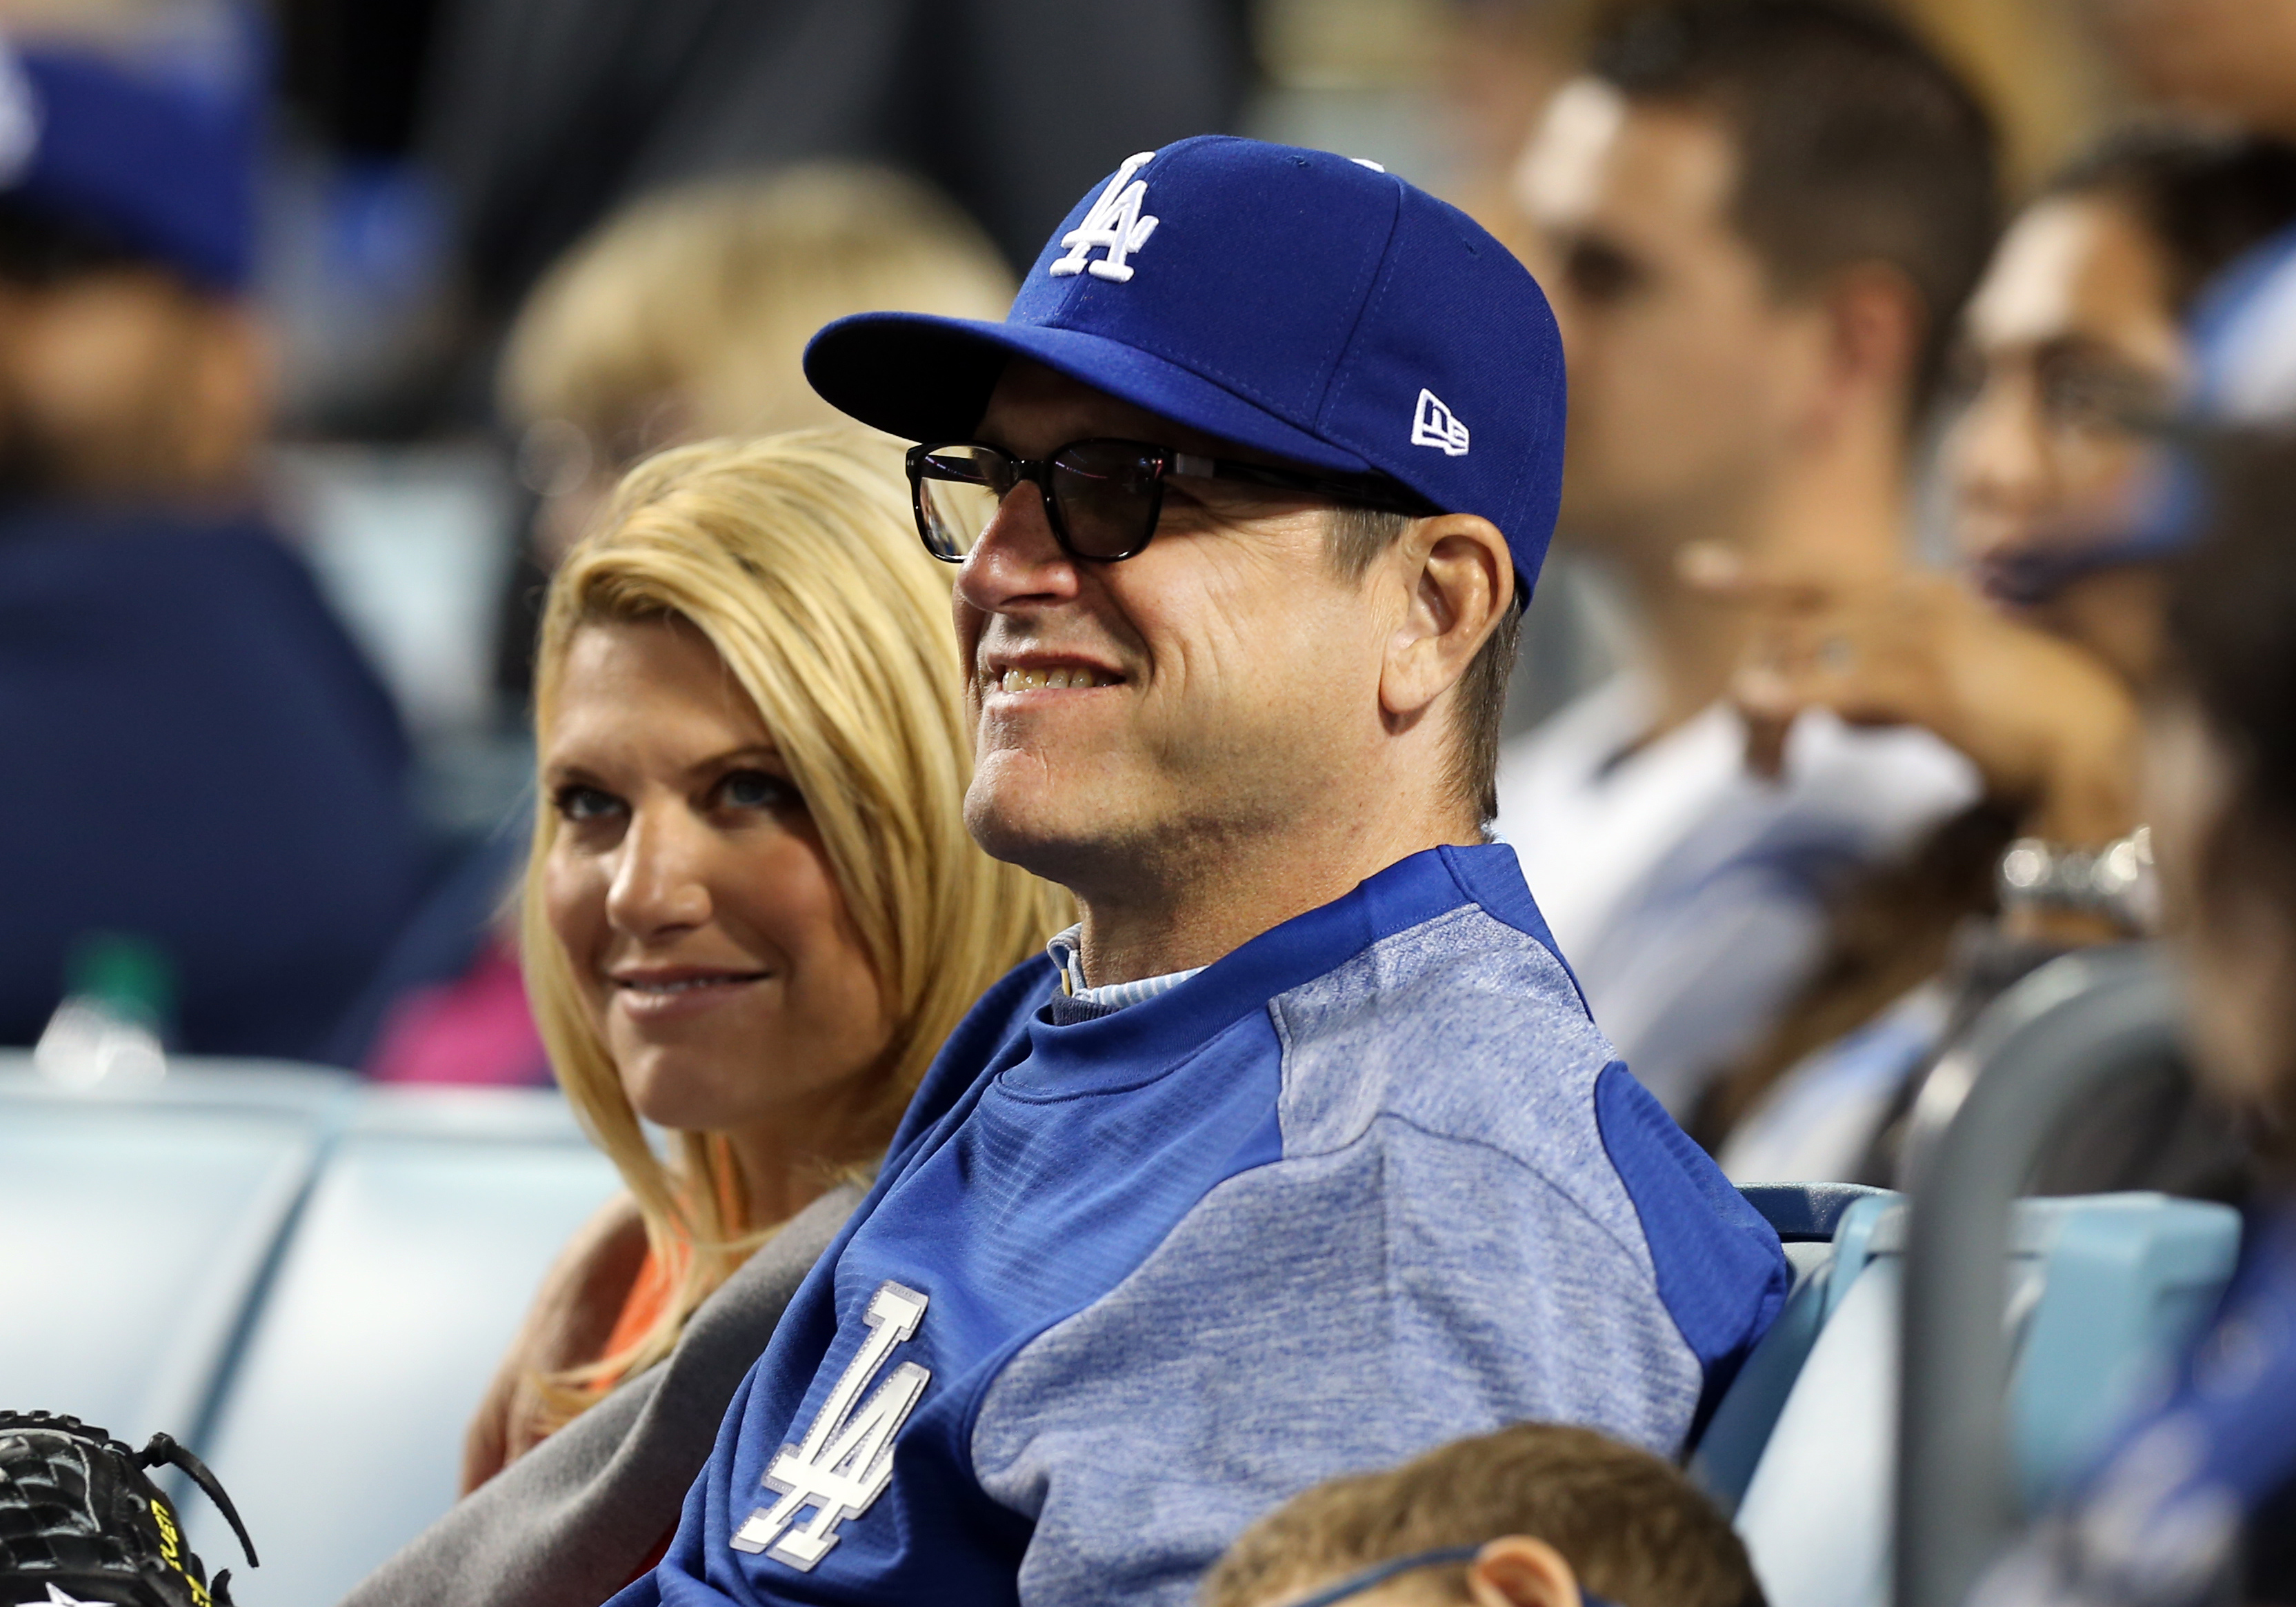 Sarah Feuerborn Harbaugh and Jim Harbaugh watch a game on May 8, 2017, at Dodger Stadium in Los Angeles, California | Source: Getty Images